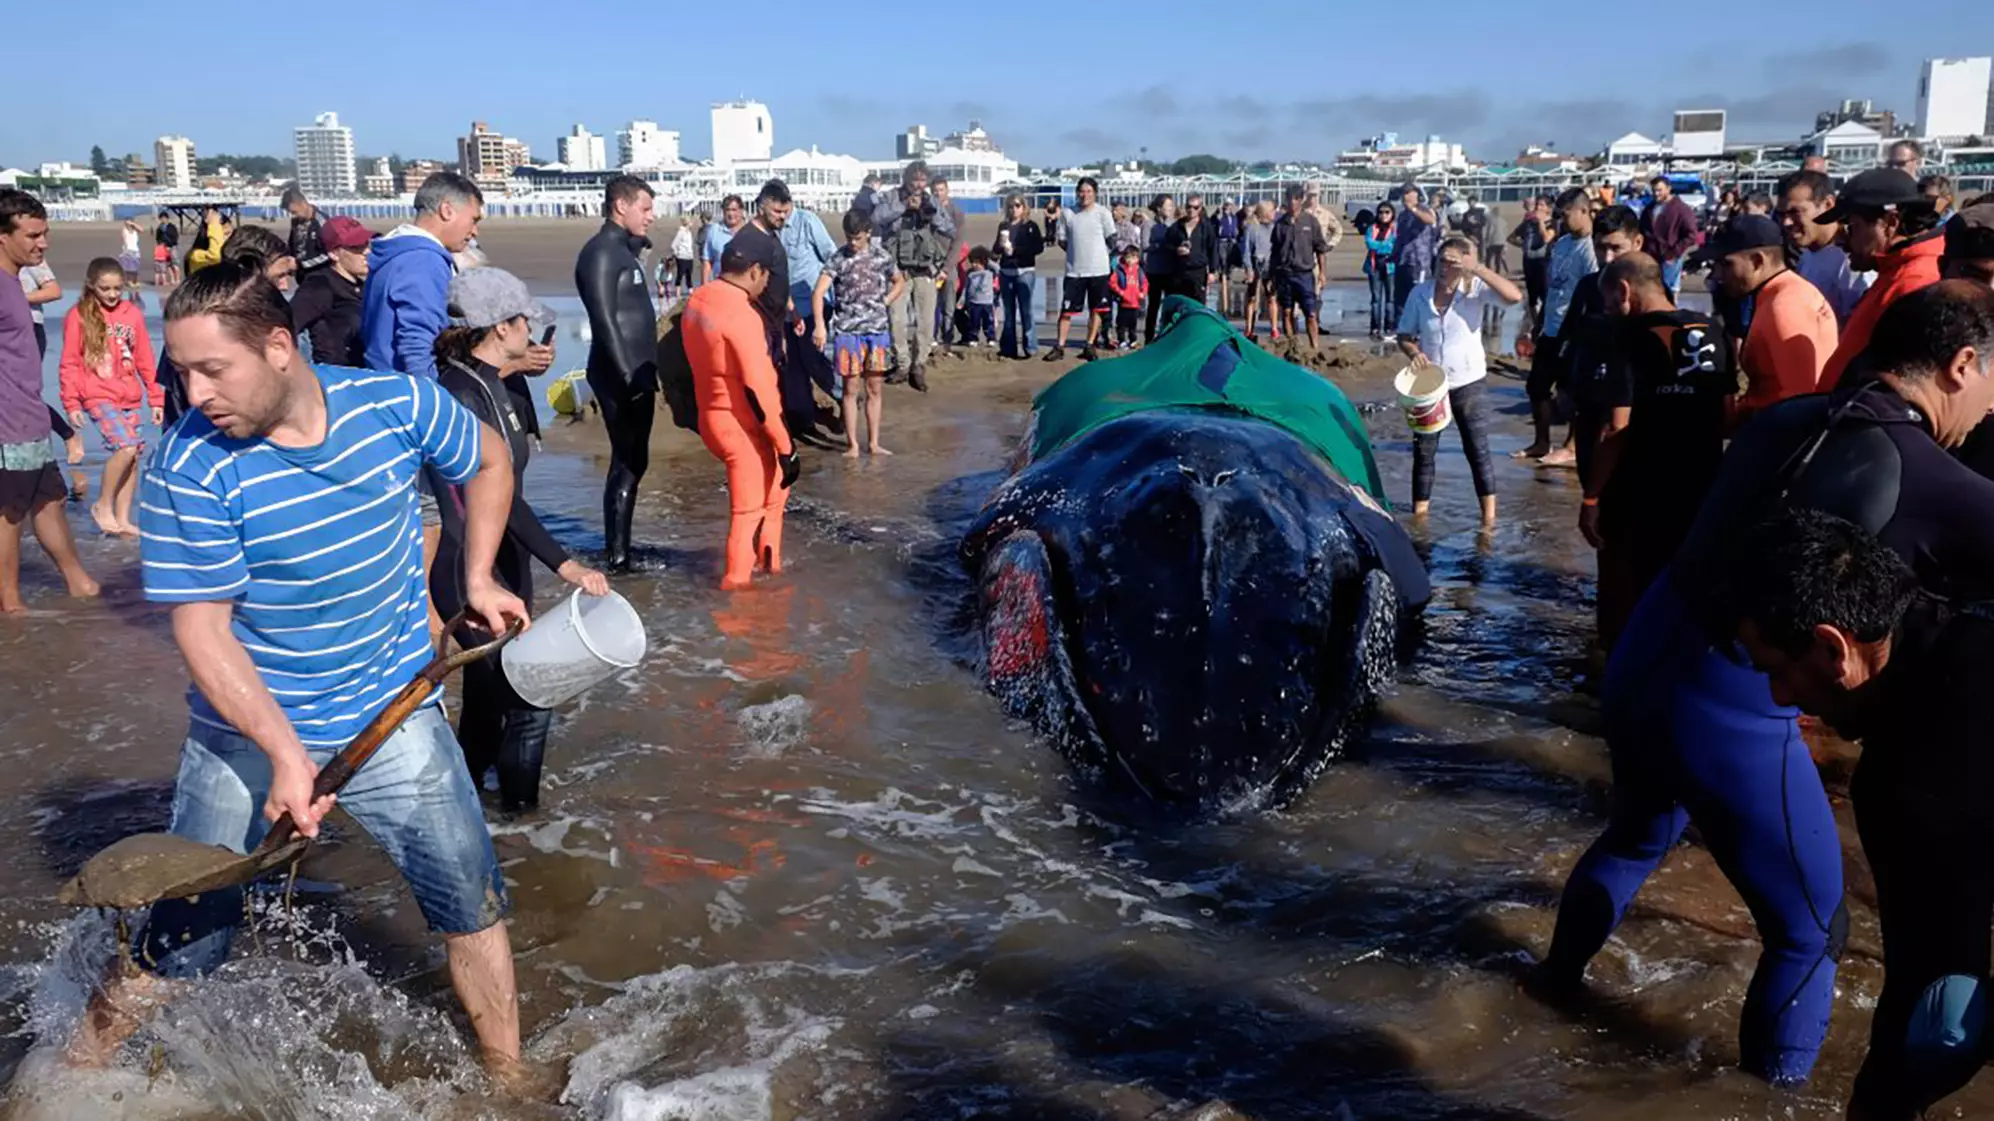 Community Comes Together To Rescue Beached Humpback Whale